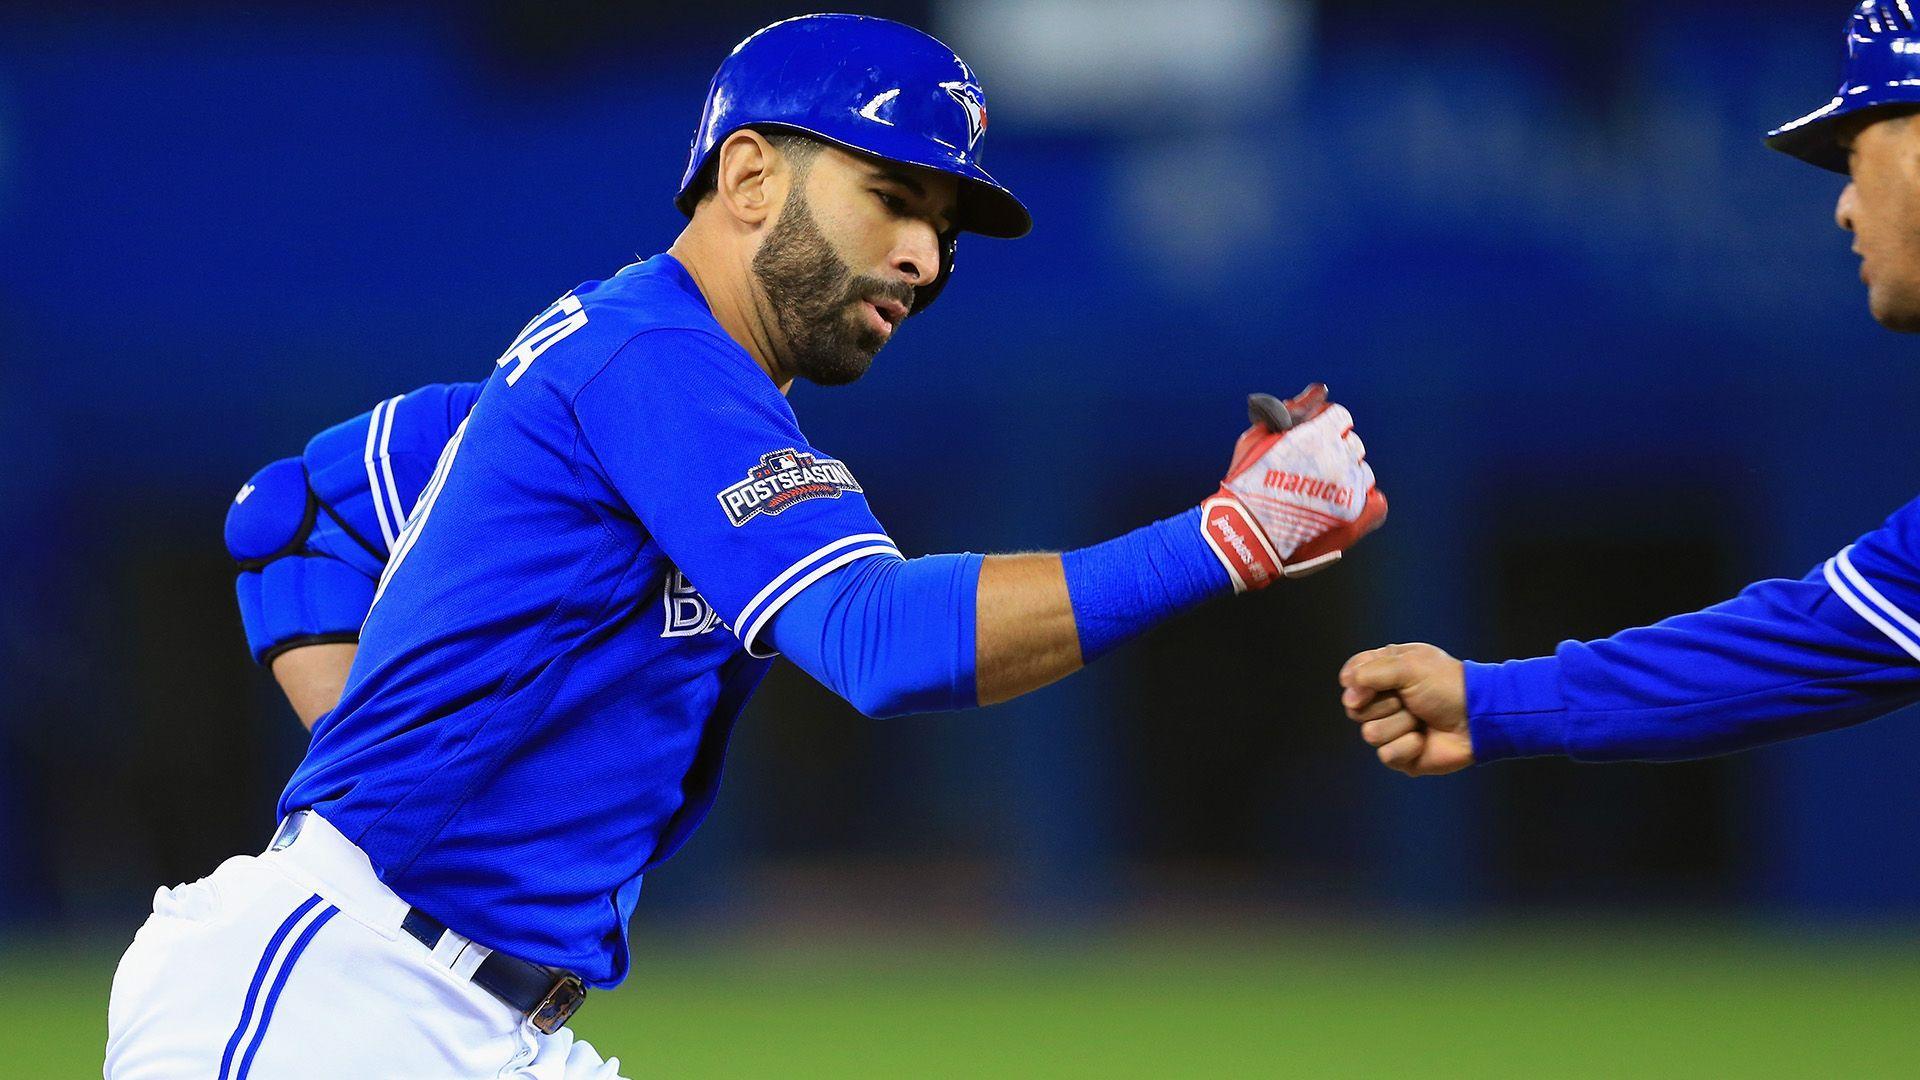 Jose Bautista's new deal with Blue Jays is a far cry from what he